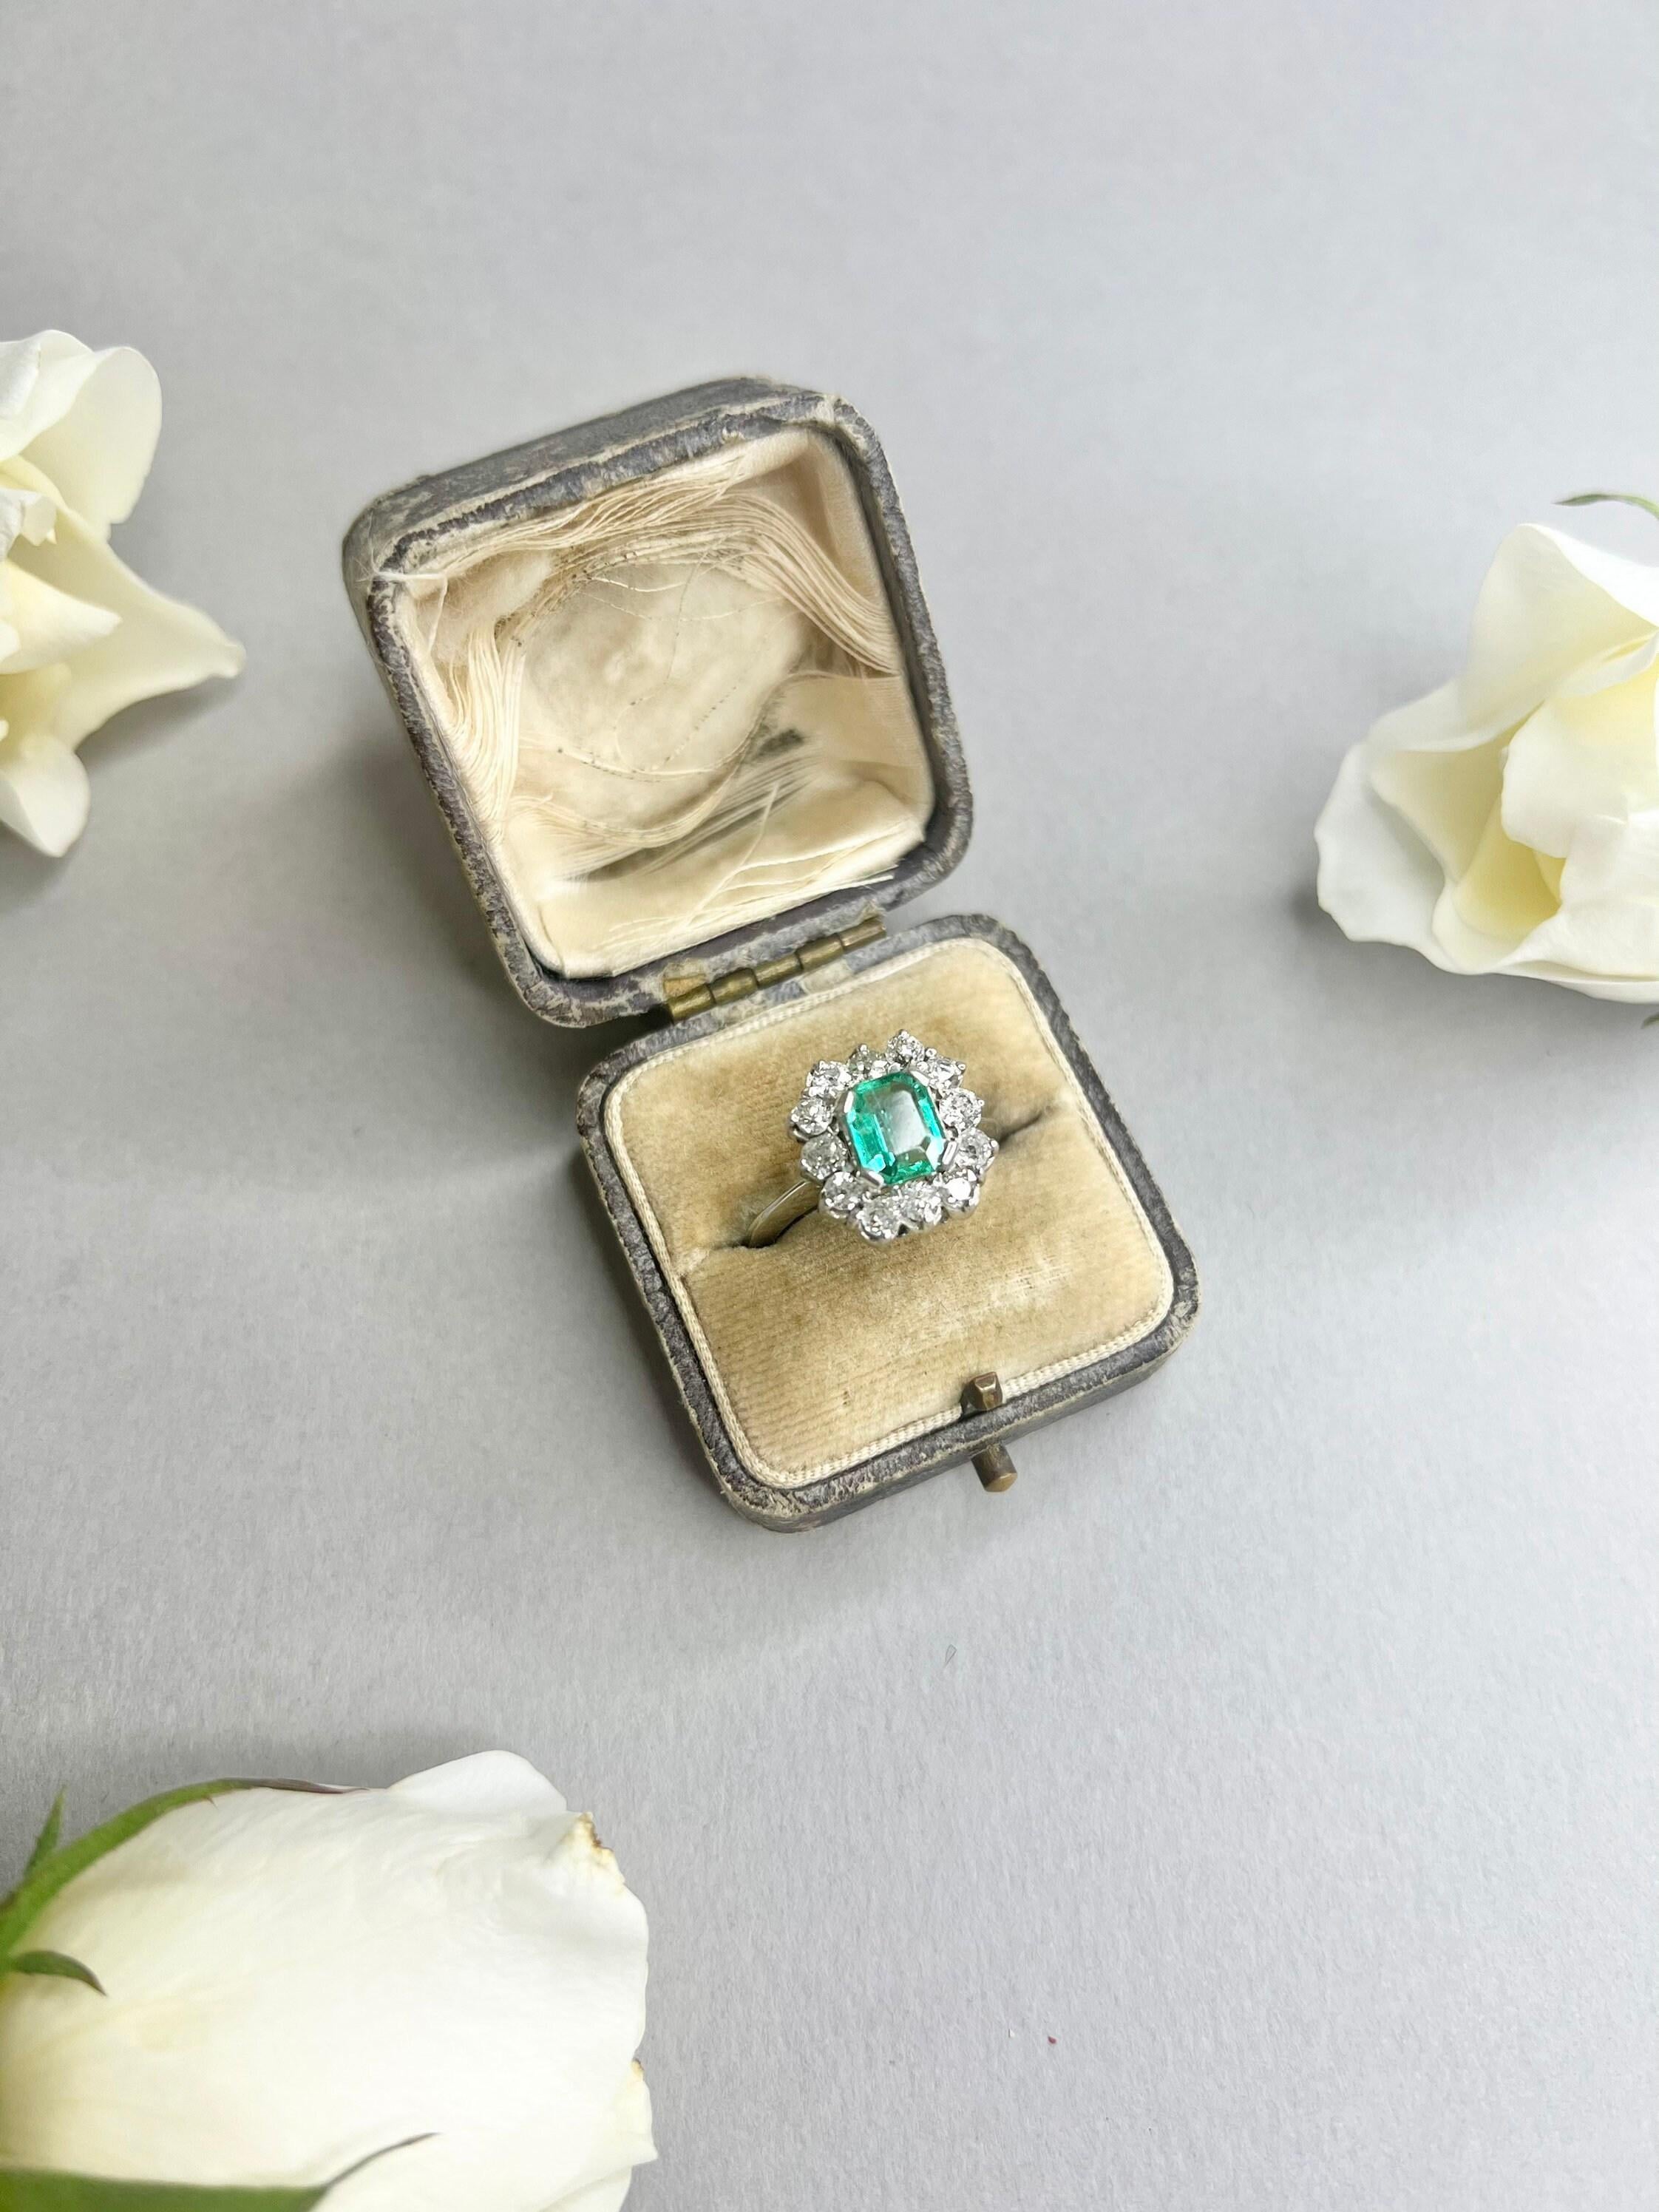 Preloved Emerald Cluster Ring

18ct White Gold Stamped 

Circa 1980’s

Gorgeous, Vintage Emerald & Diamond Cluster Ring. In Great Preloved Condition. Would Make a Fabulous Engagement Ring! 

Measures Approx 13.3mm x 13.3mm

Emerald Measures Approx